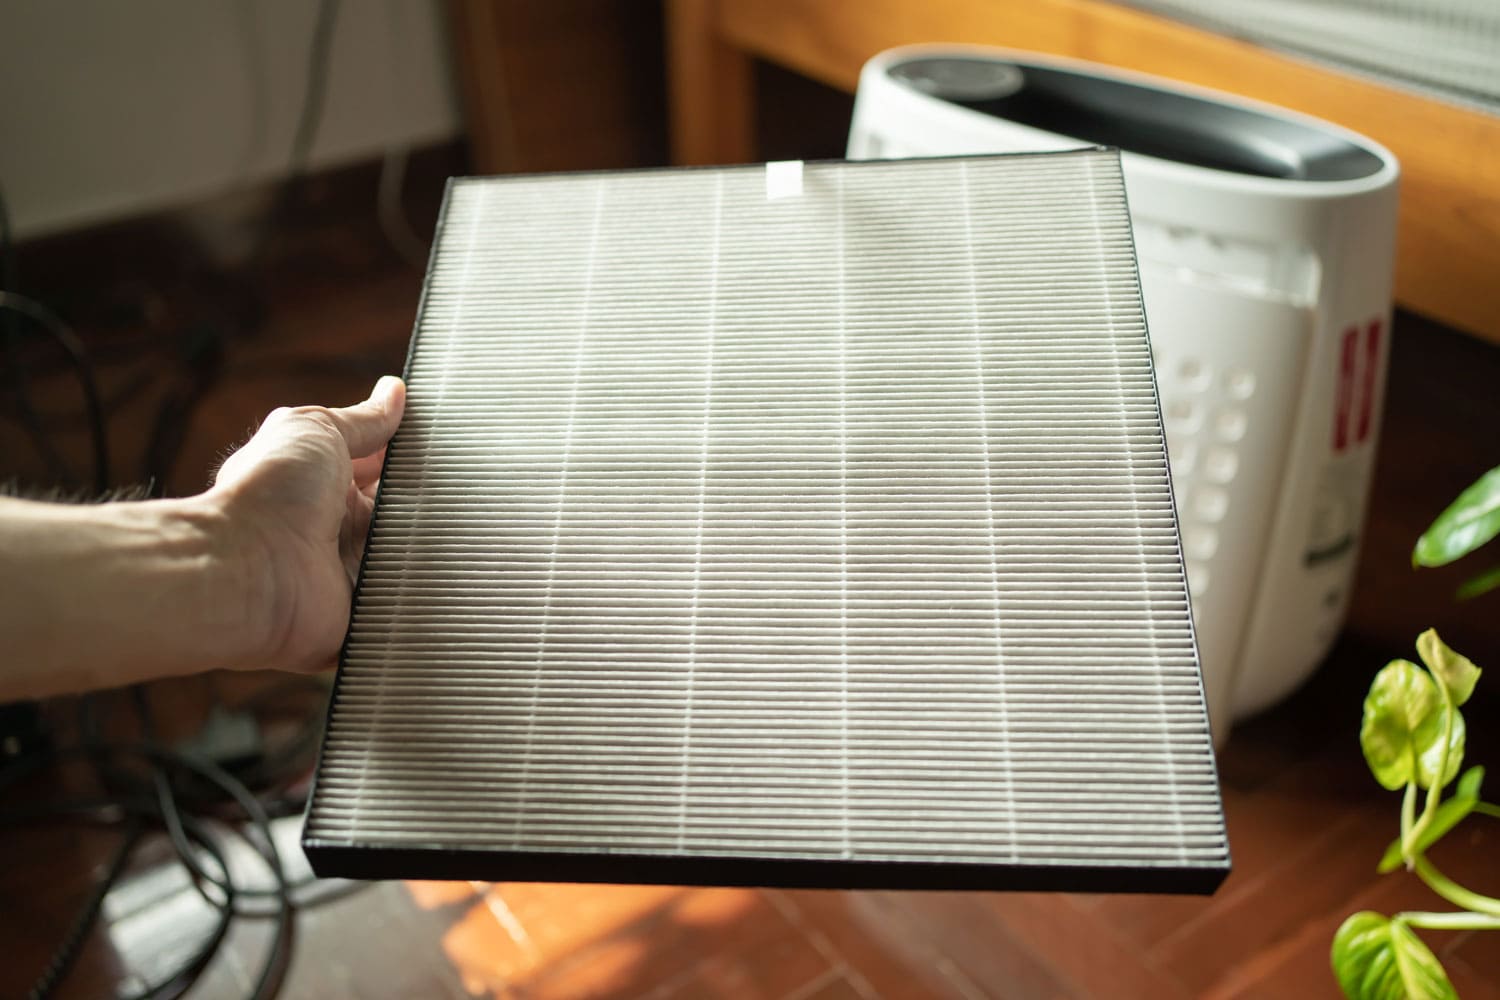 Replacement air filter for an air purifier